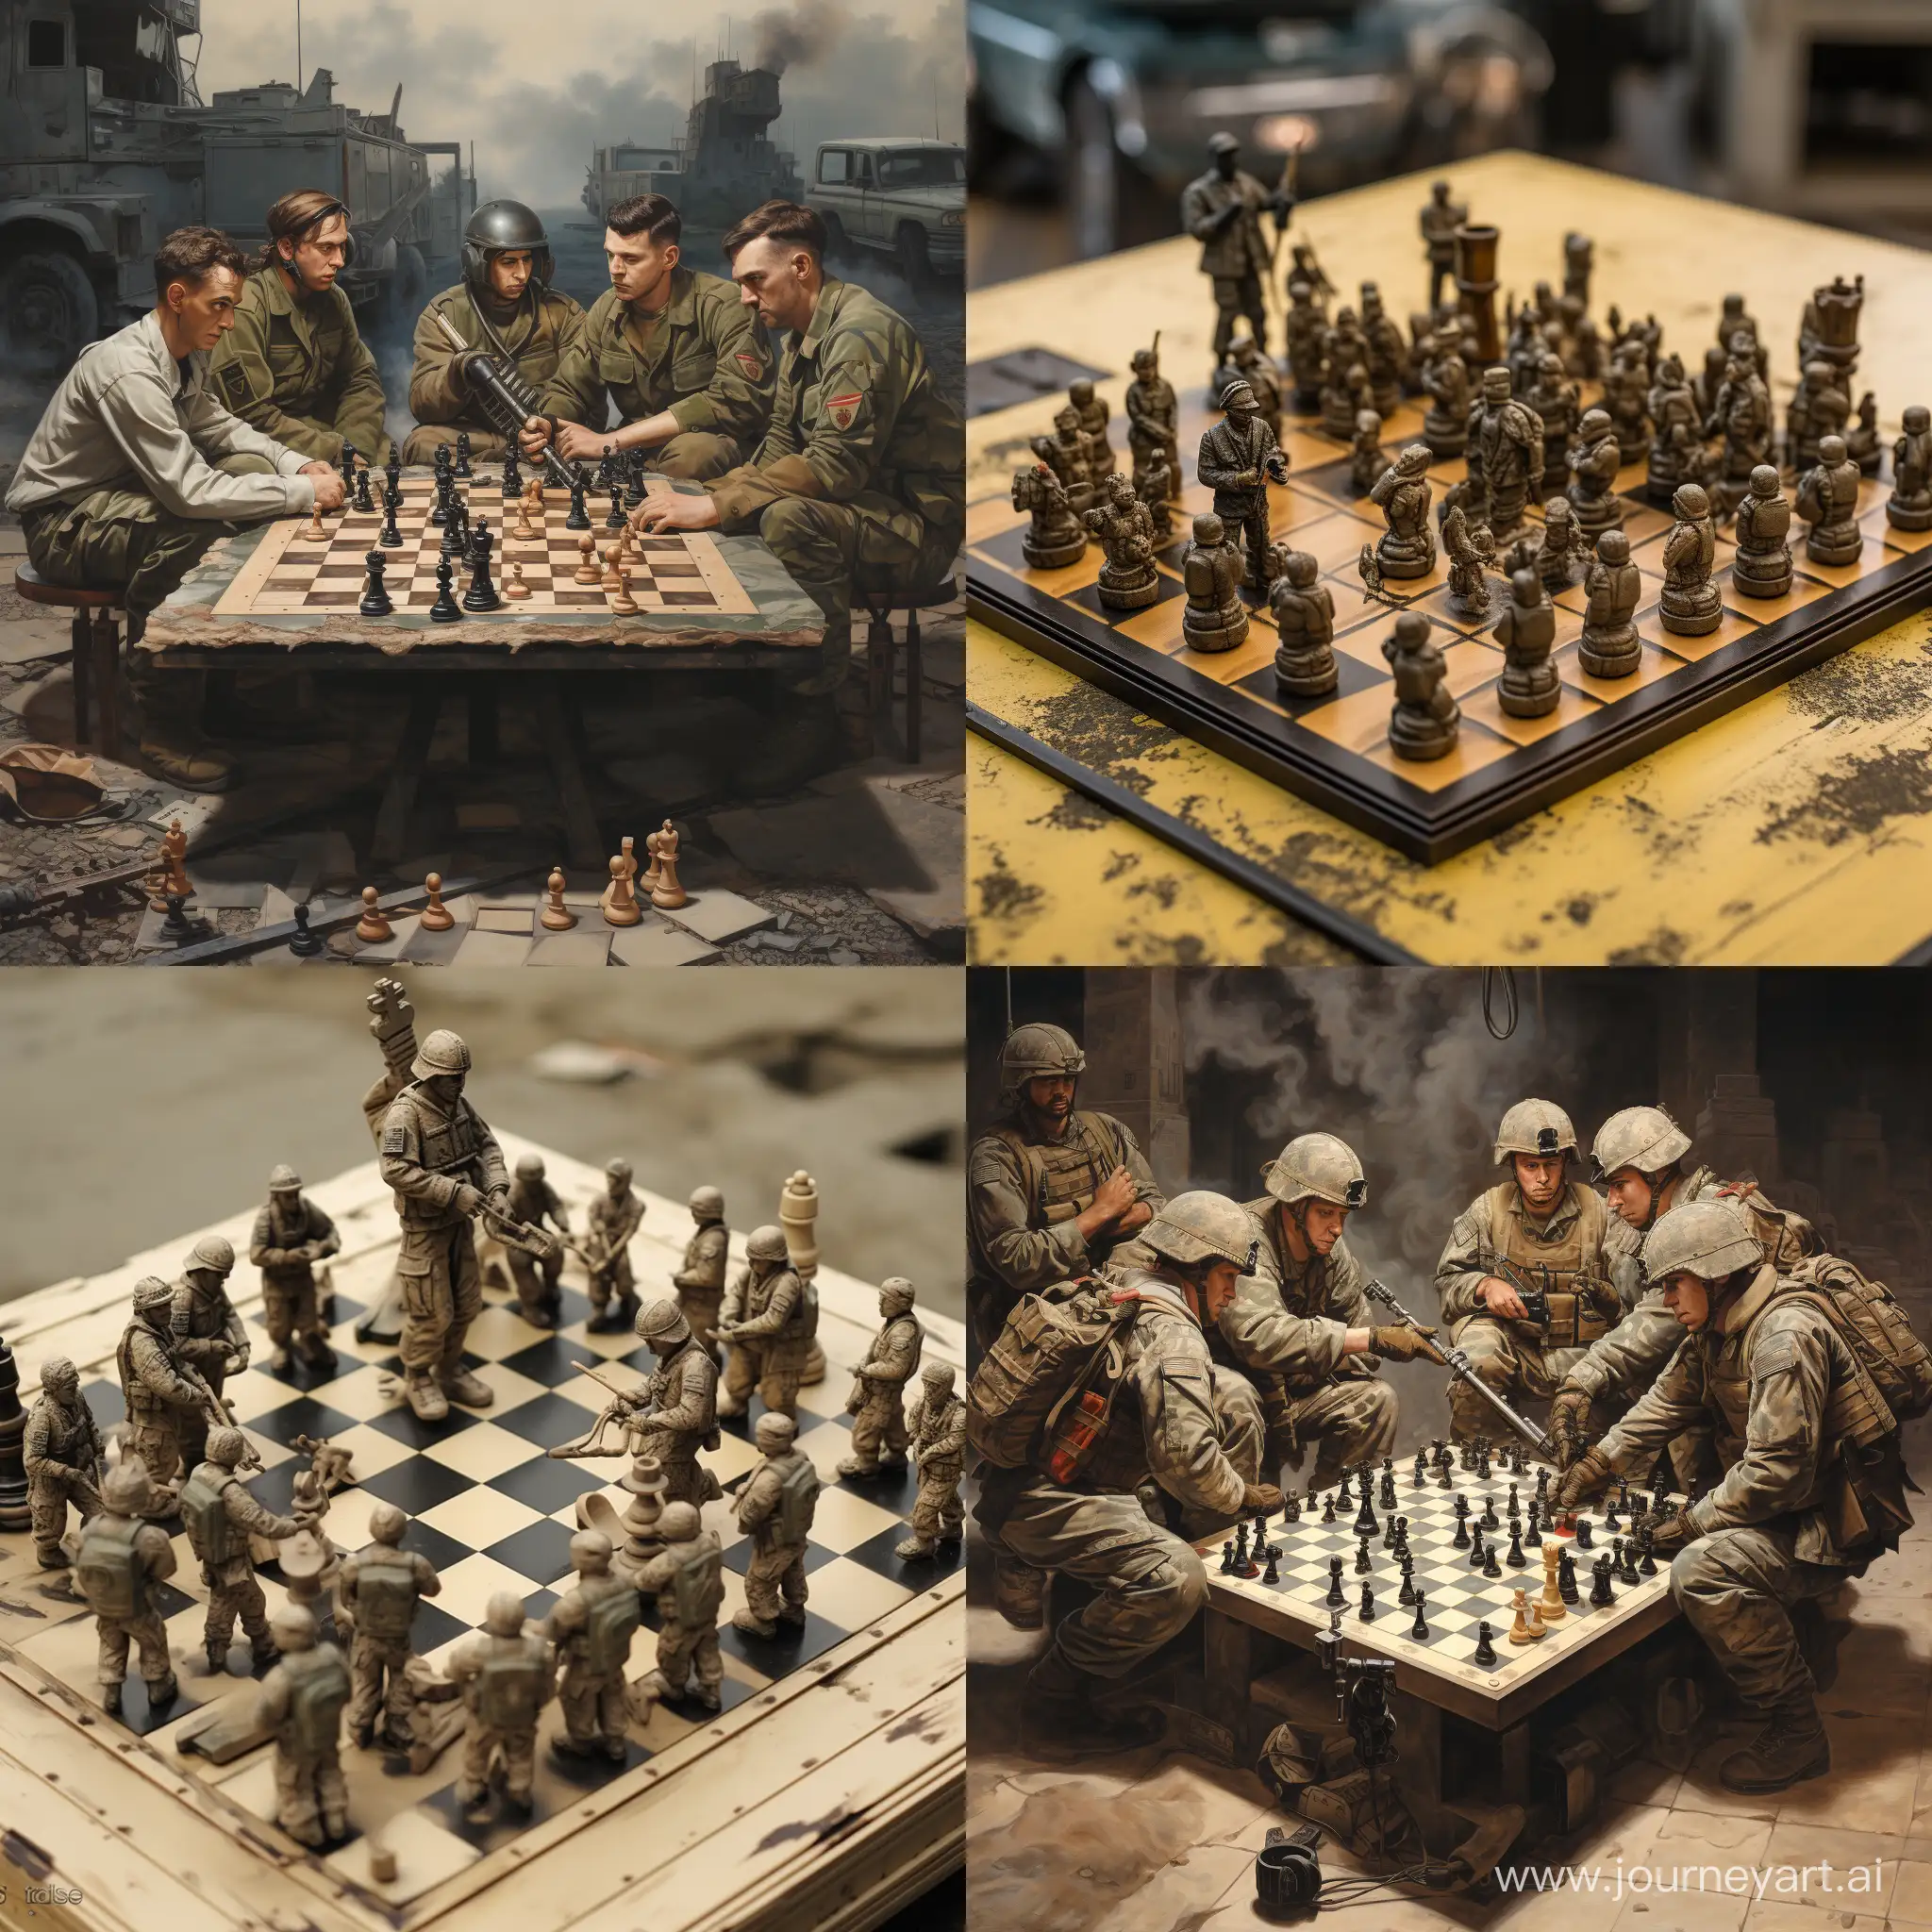 a chess board where instead of chess, there are soldiers with machine guns, machine guns and grenade launchers.